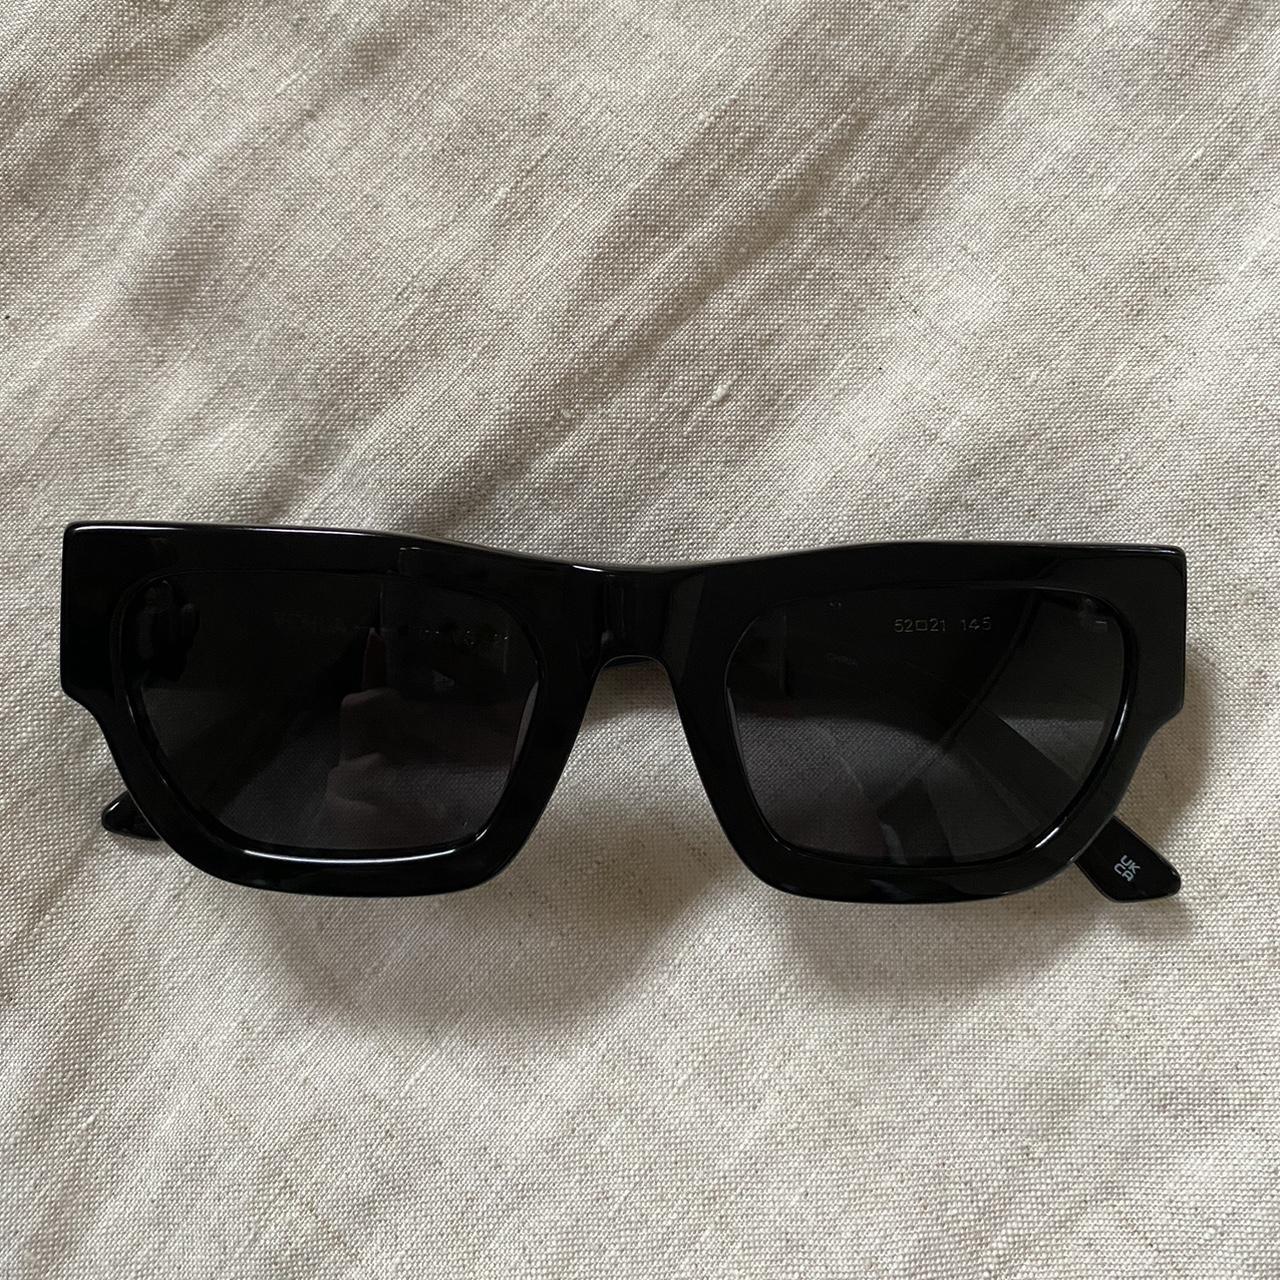 Brand new Vehla sunglasses with case and box Style:... - Depop